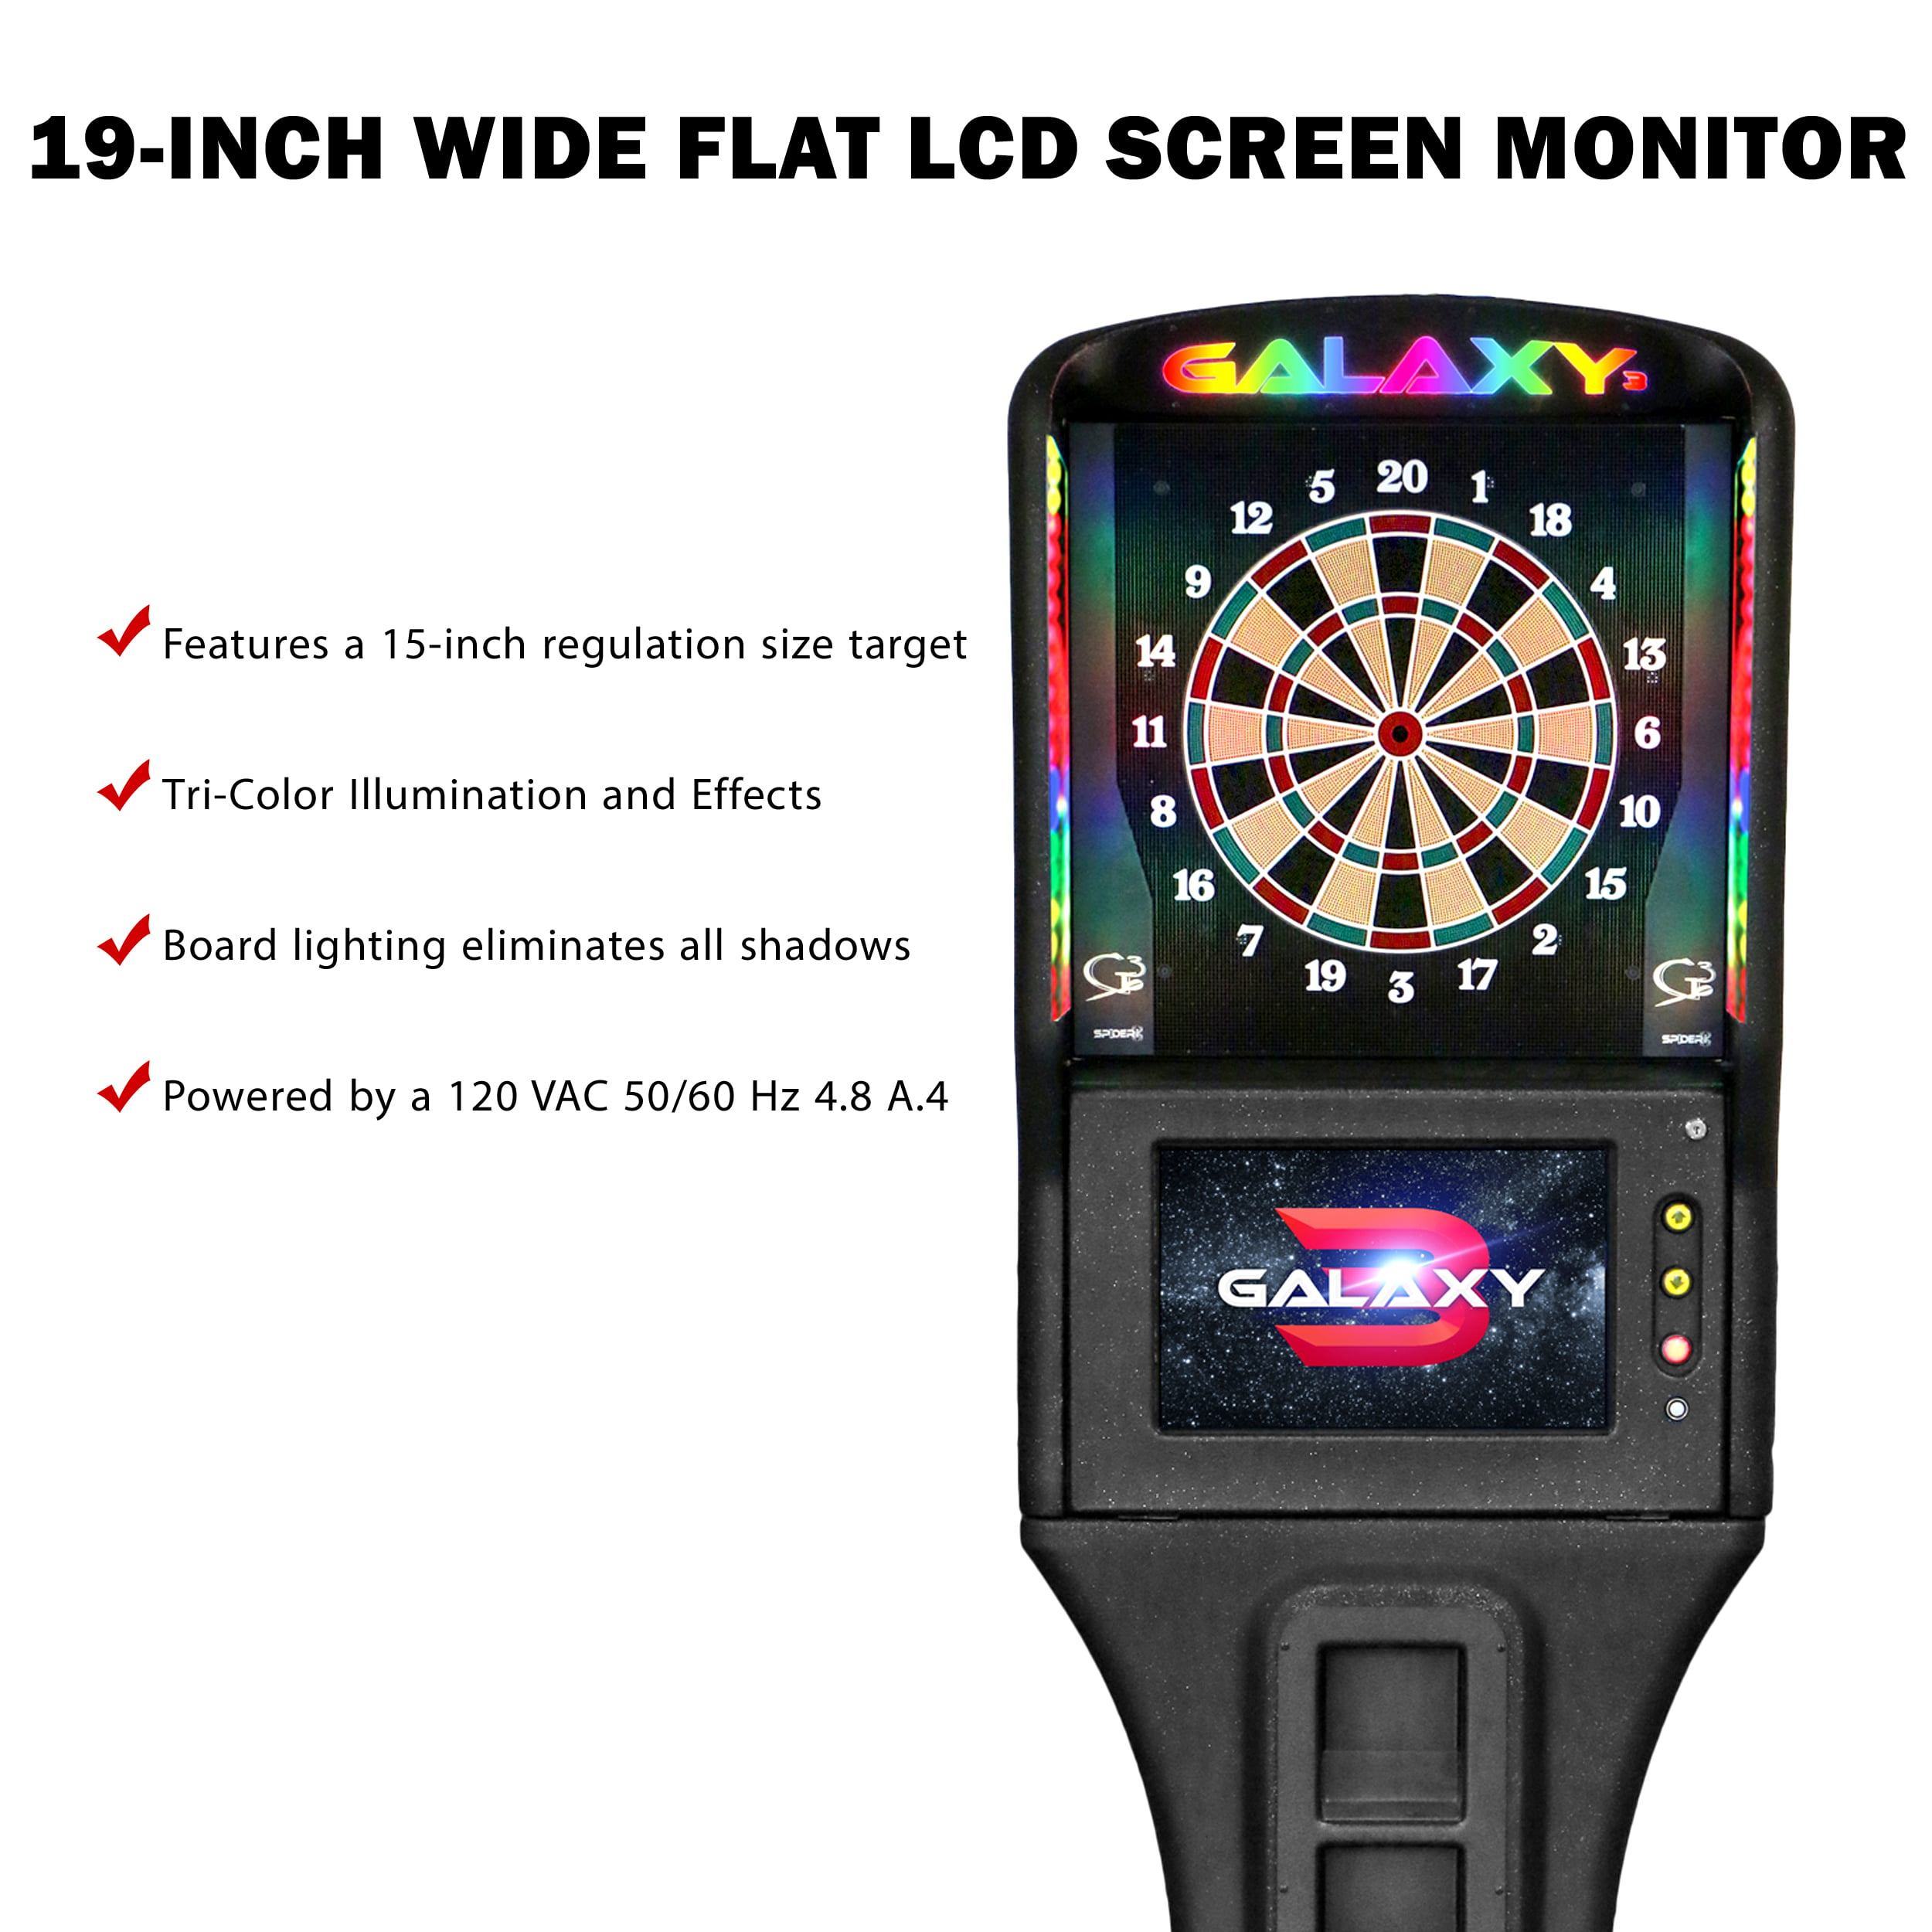 Arachnid Spider 360 3000 Series Electronic Home Dartboard (Touch to Flip)  🕷️🎯 – Game Room Shop